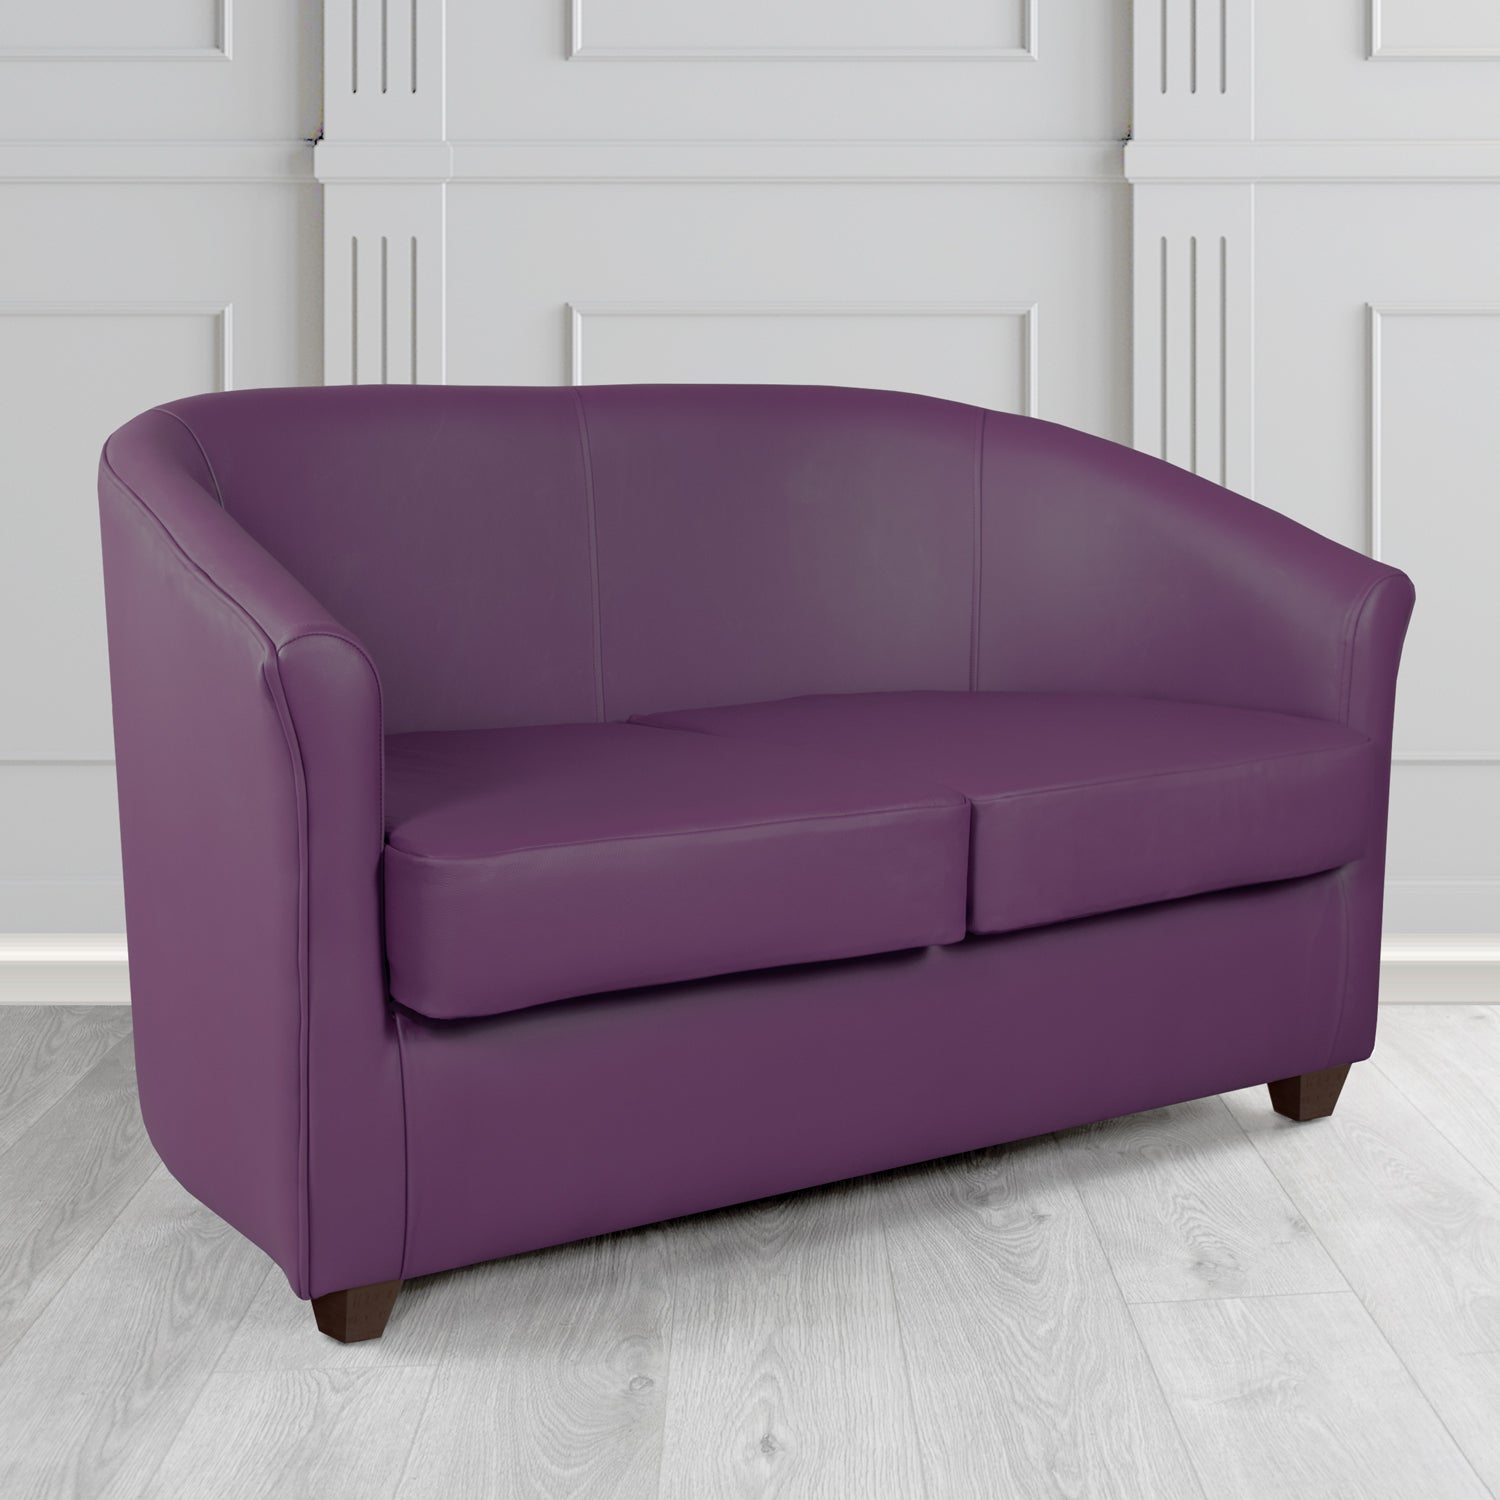 Cannes 2 Seater Tub Sofa in Just Colour Damson Crib 5 Faux Leather